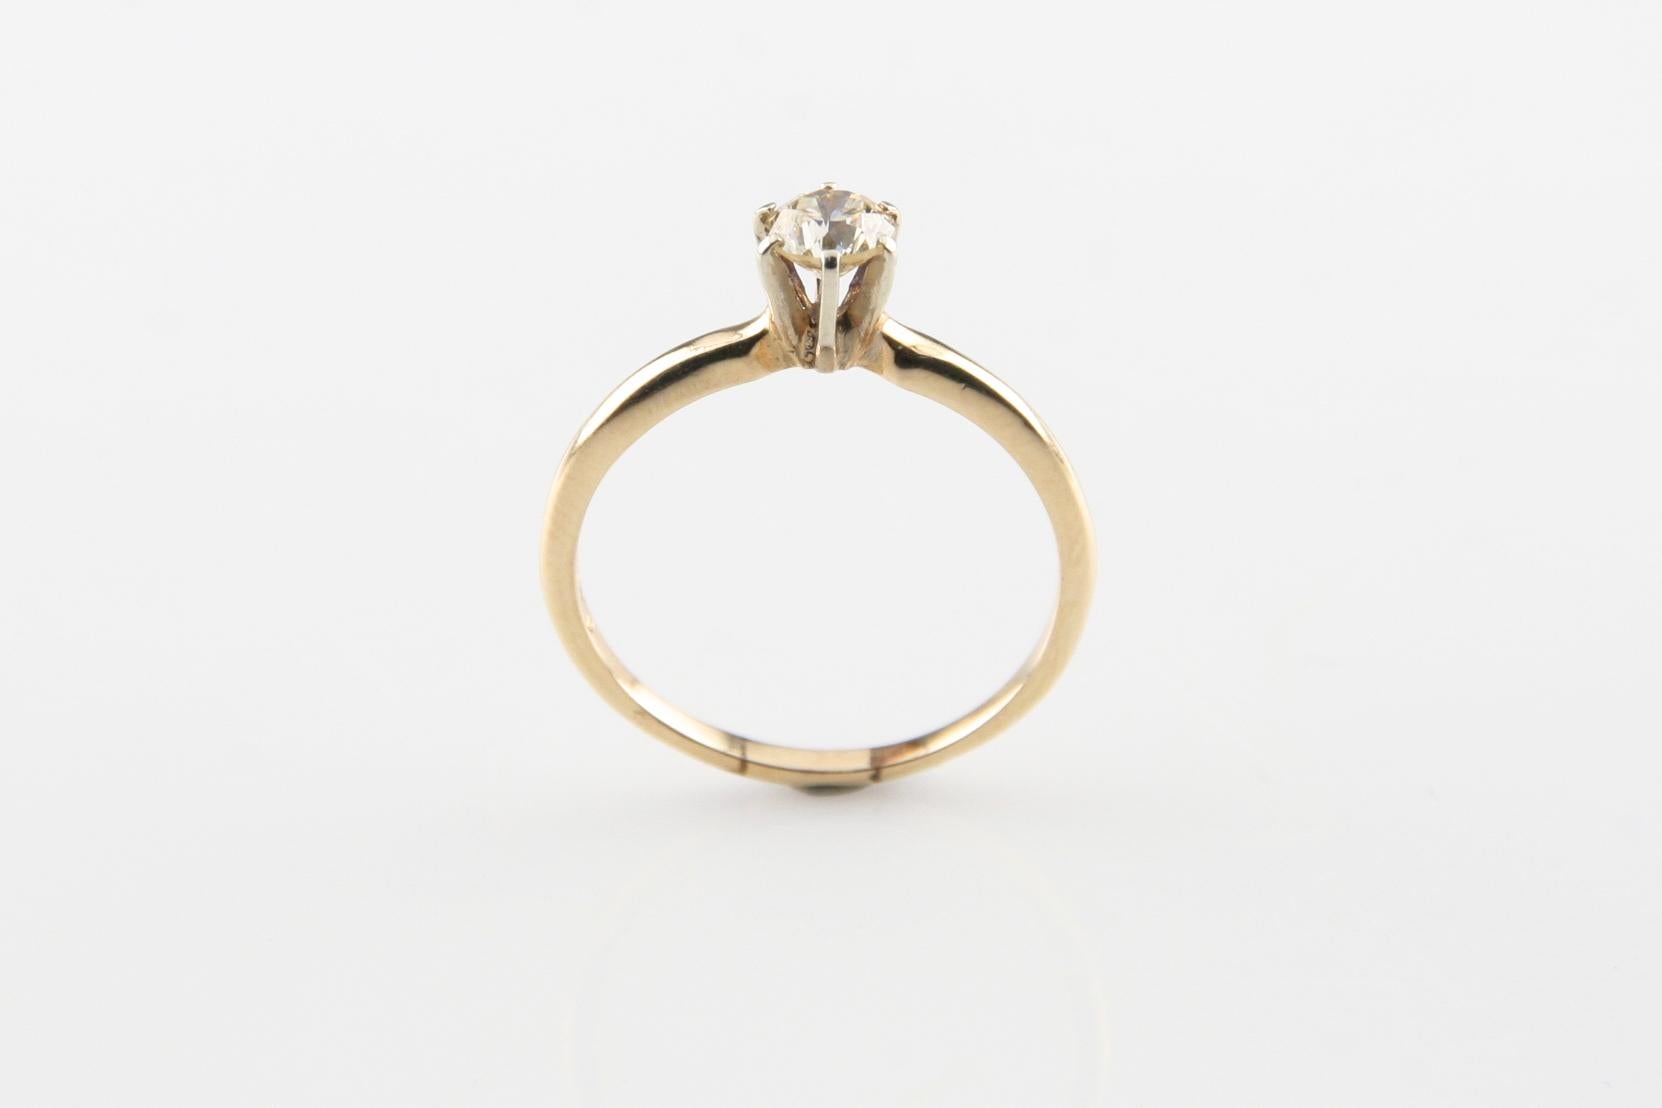 14KT Yellow Gold Diamond Solitaire Engagement Ring
RING SIZE: 7
BAND WIDTH: 1 1/2mm
METAL: 14KT yellow Gold
GENDER: Ladies
STYLE: Solitaire
DIAMOND WEIGHT: 0.43 CT.
TOTAL WEIGHT: 1.89 GR.
CONDITION: Good